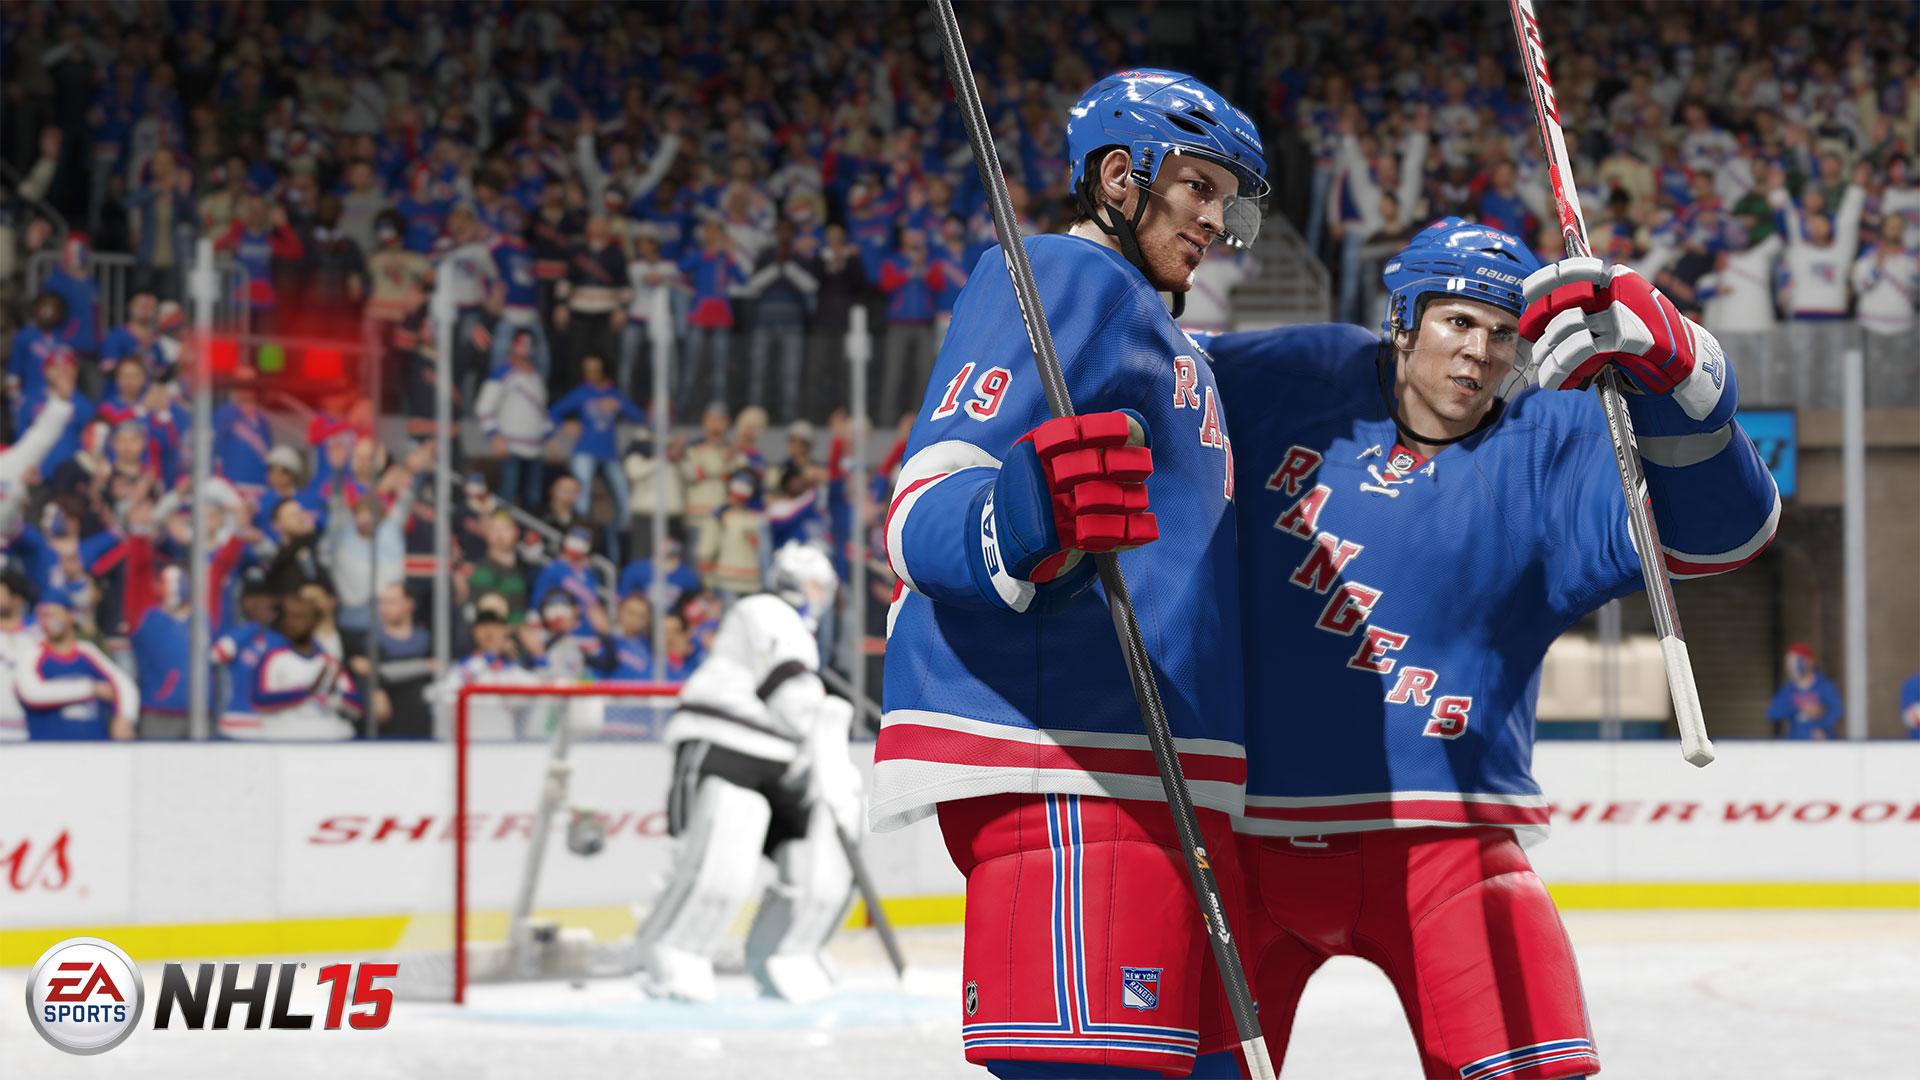 NHL 2000 - PC Review and Full Download